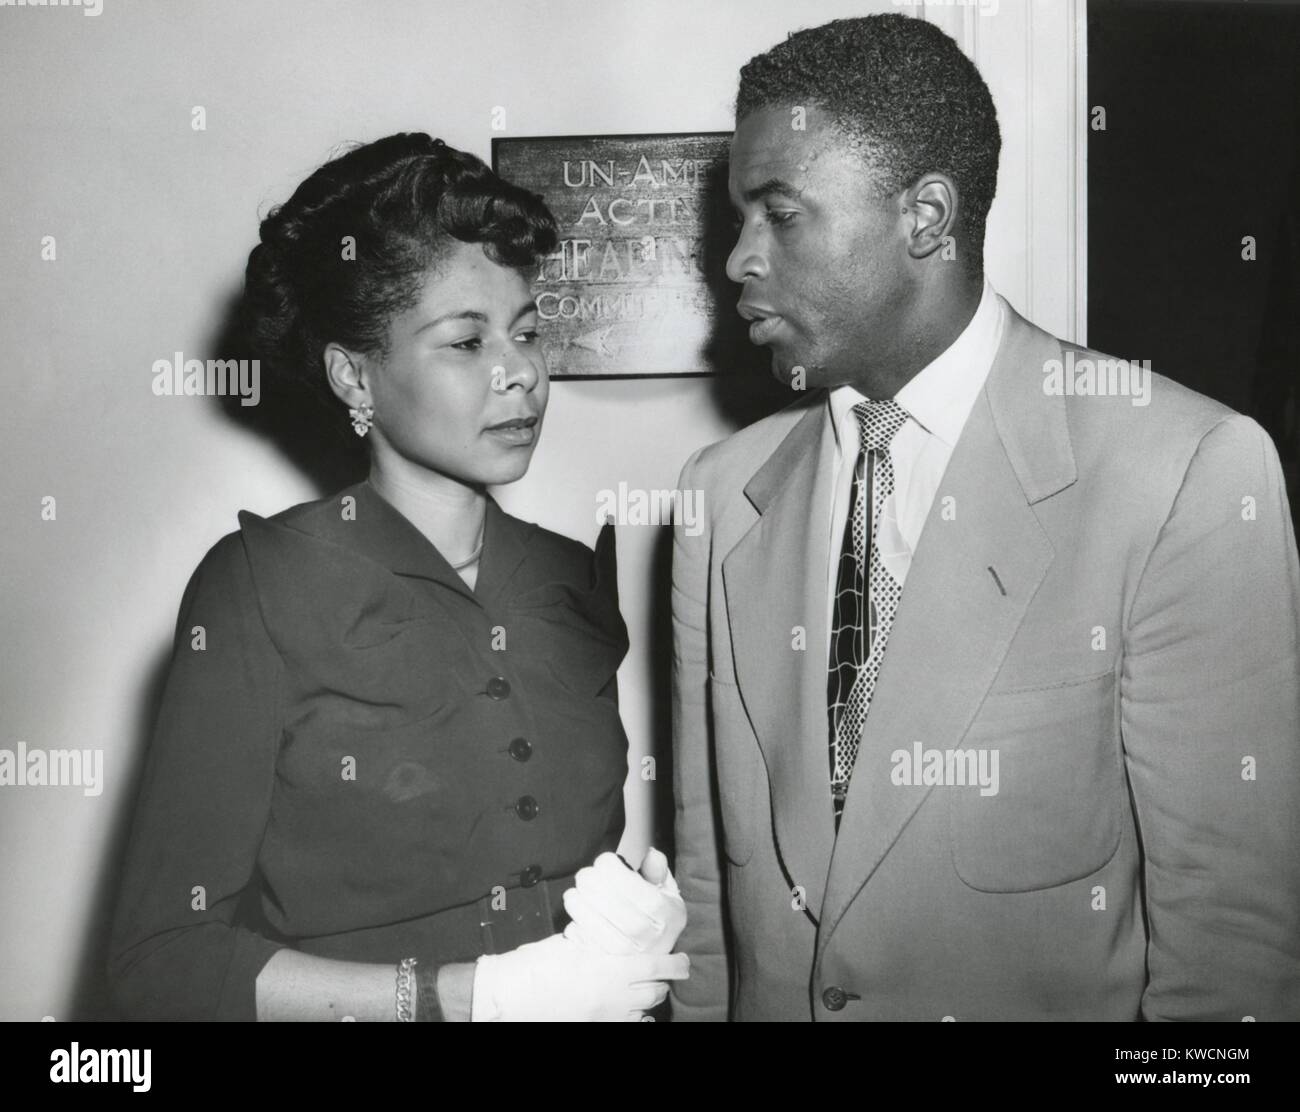 Jackie Robinson, Brooklyn baseball player and his wife Rachel outside the HUAC committee room. July 18, 1949. While he was considered a 'friendly' witness, his testimony to the House Un-American Activities included criticism of American racial violence and segregation. - (BSLOC 2014 17 167) Stock Photo